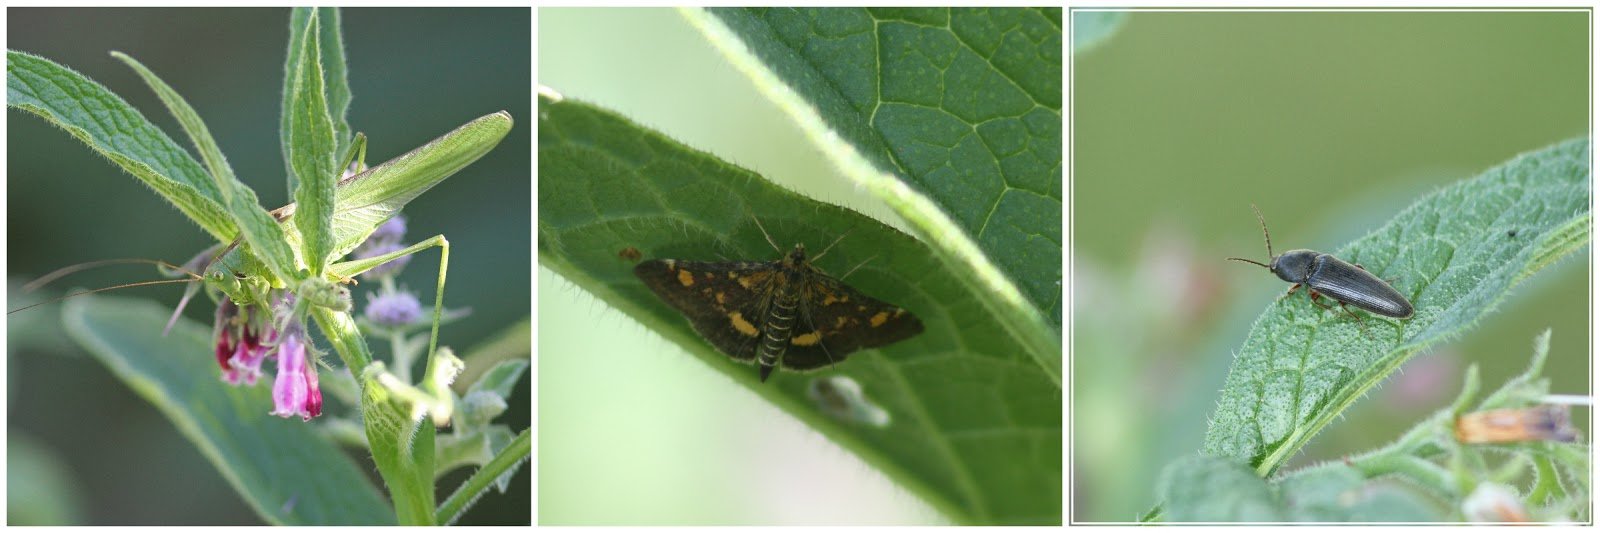 Photos of invertebrates on our Comfrey plants - by Peter Alfrey.